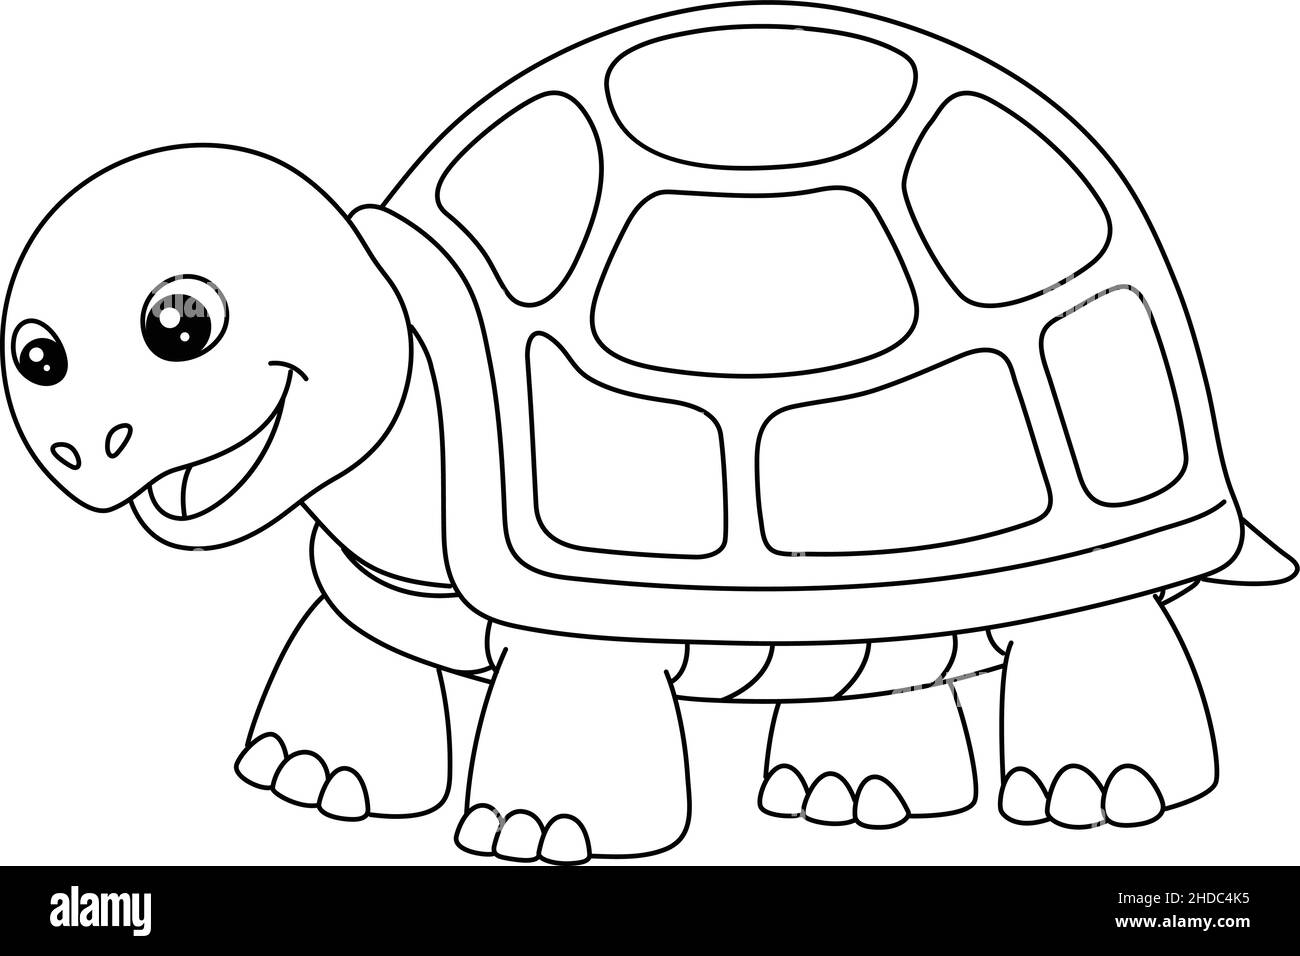 Turtle Coloring Page Isolated for Kids Stock Vector